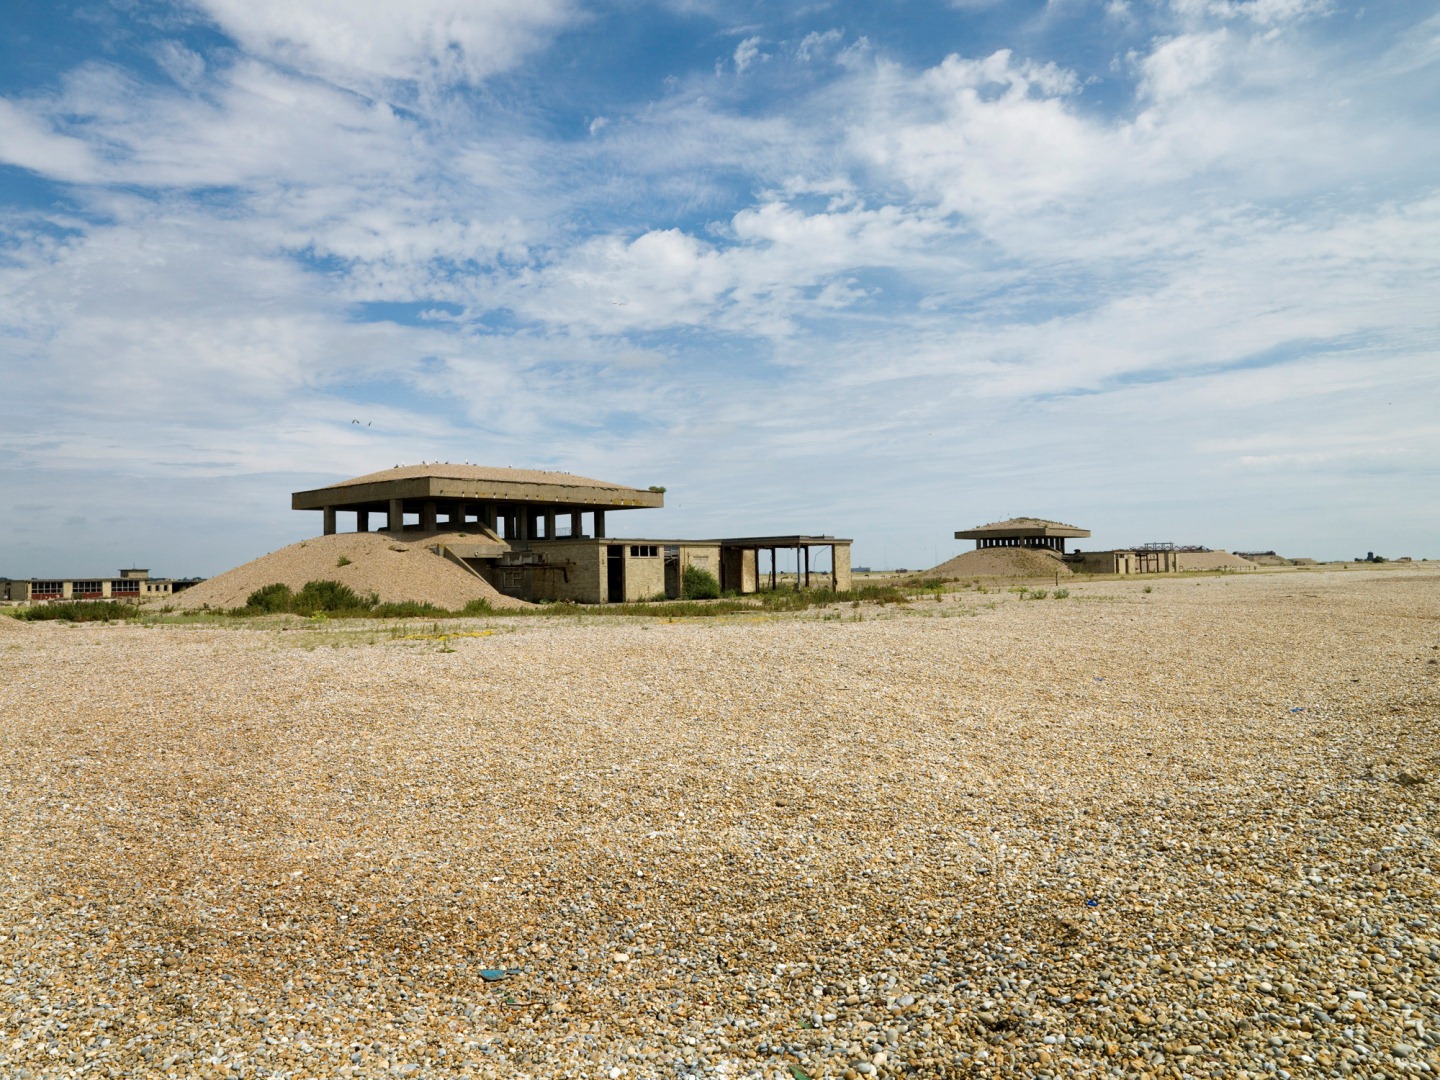 Atomic Weapons Research Establishment, Orford Ness, Suffolk, two 1960s test structures, known as the Pagodas, in the event of an explosion their roofs were designed to smoother the explosion, scheduled.